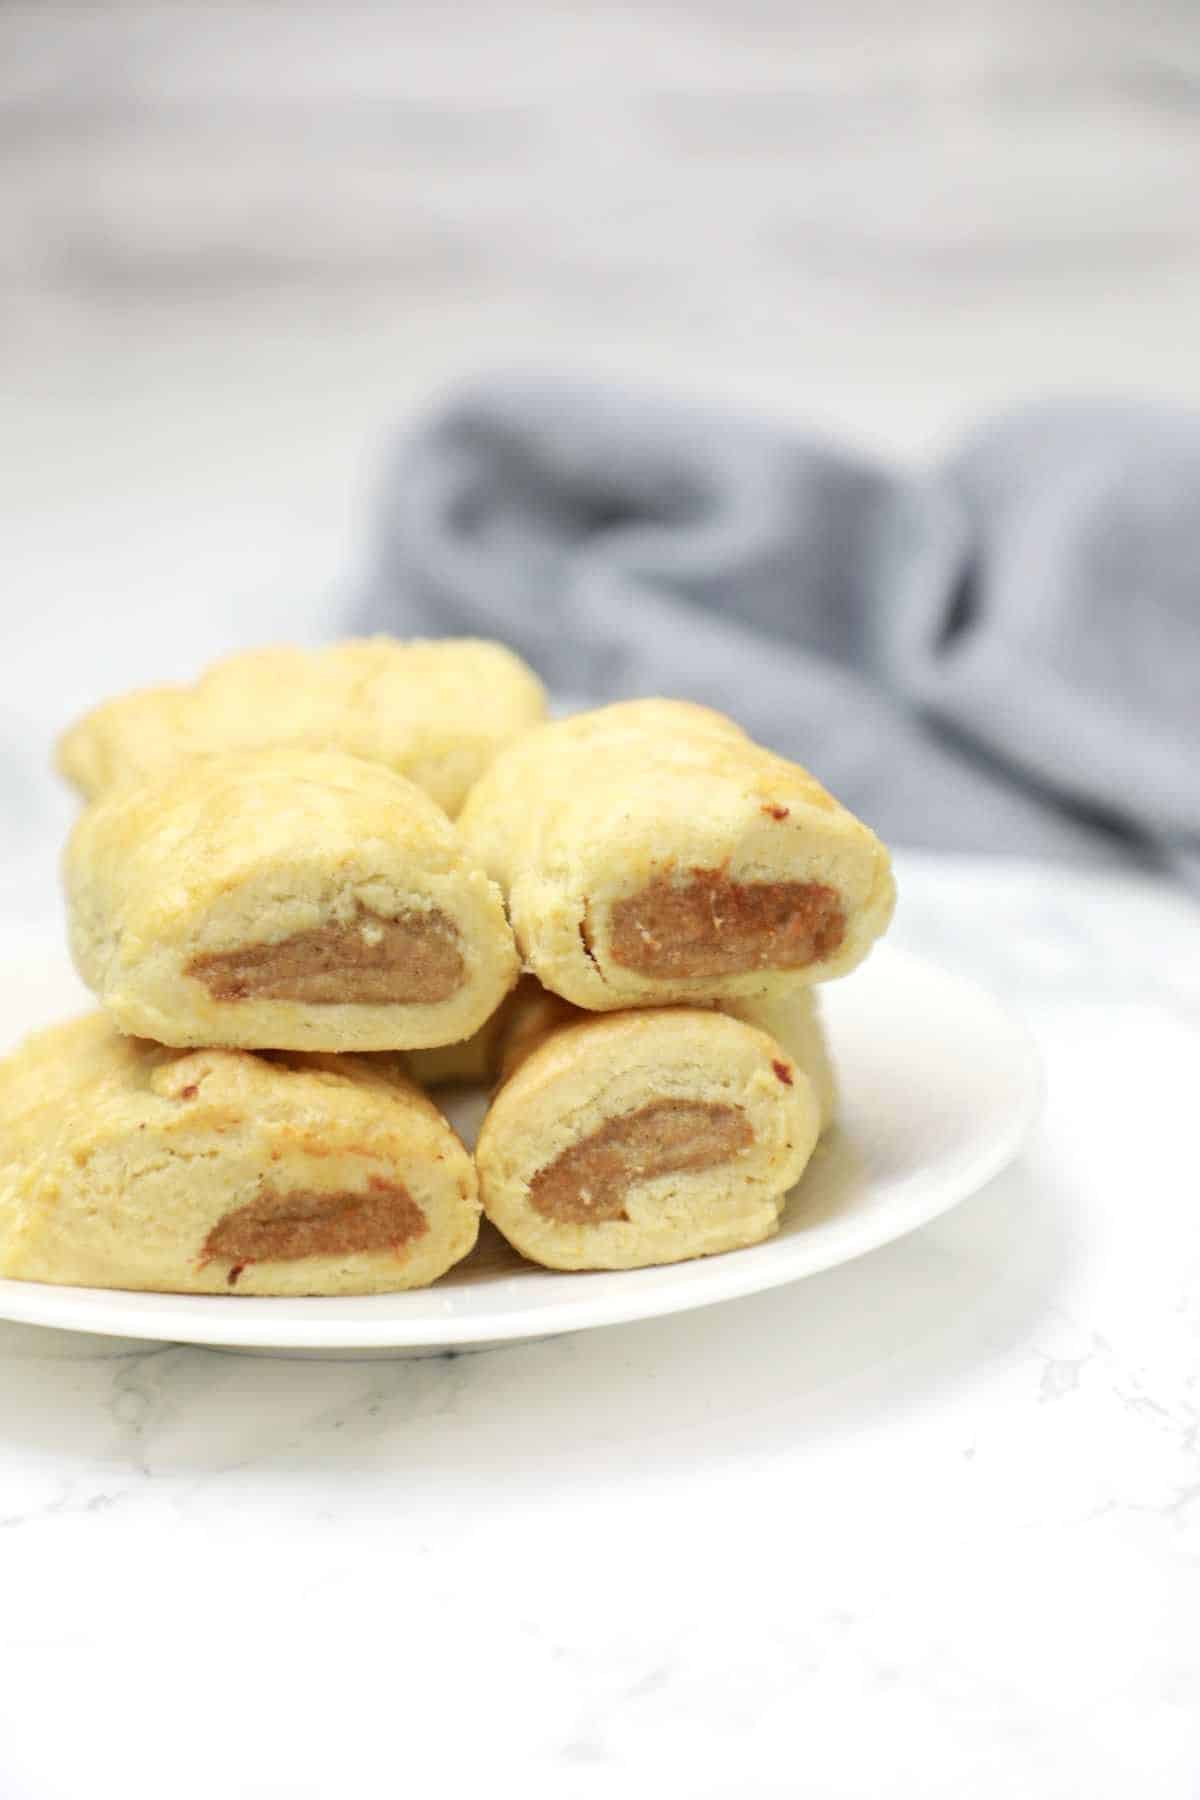 the cooked air fryer sausage rolls displayed on a plate.